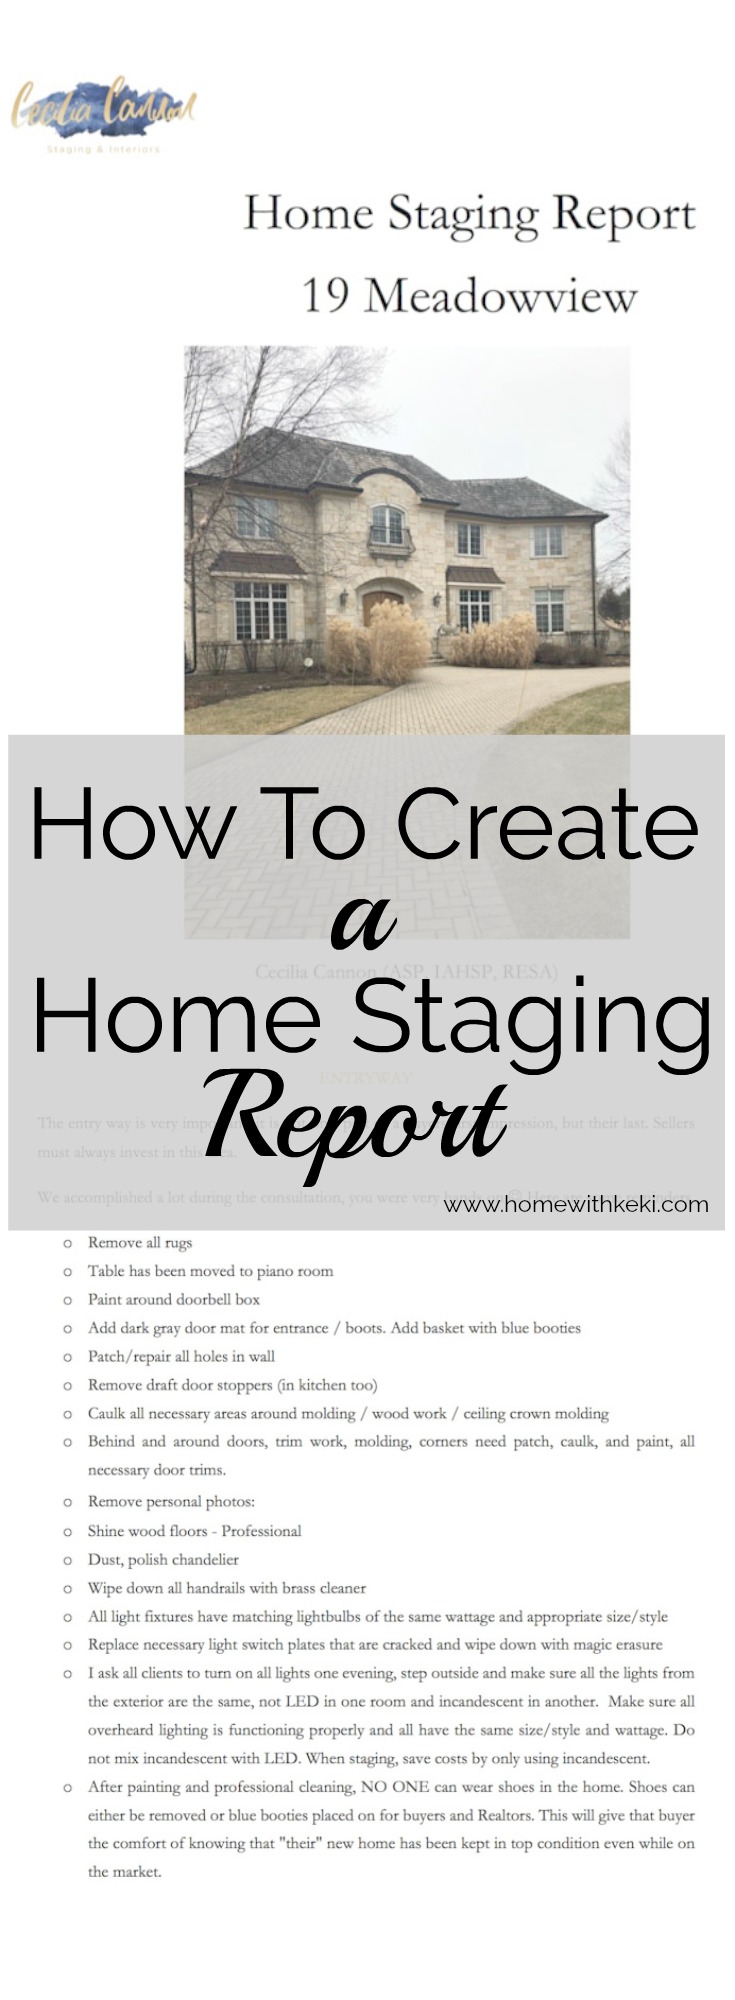 Sharing all my tips on how to create a Home Staging Report for your clients, more on the blog www.homewithkeki.com #homestaging #stagingreports #stagedhomes #stagingtips